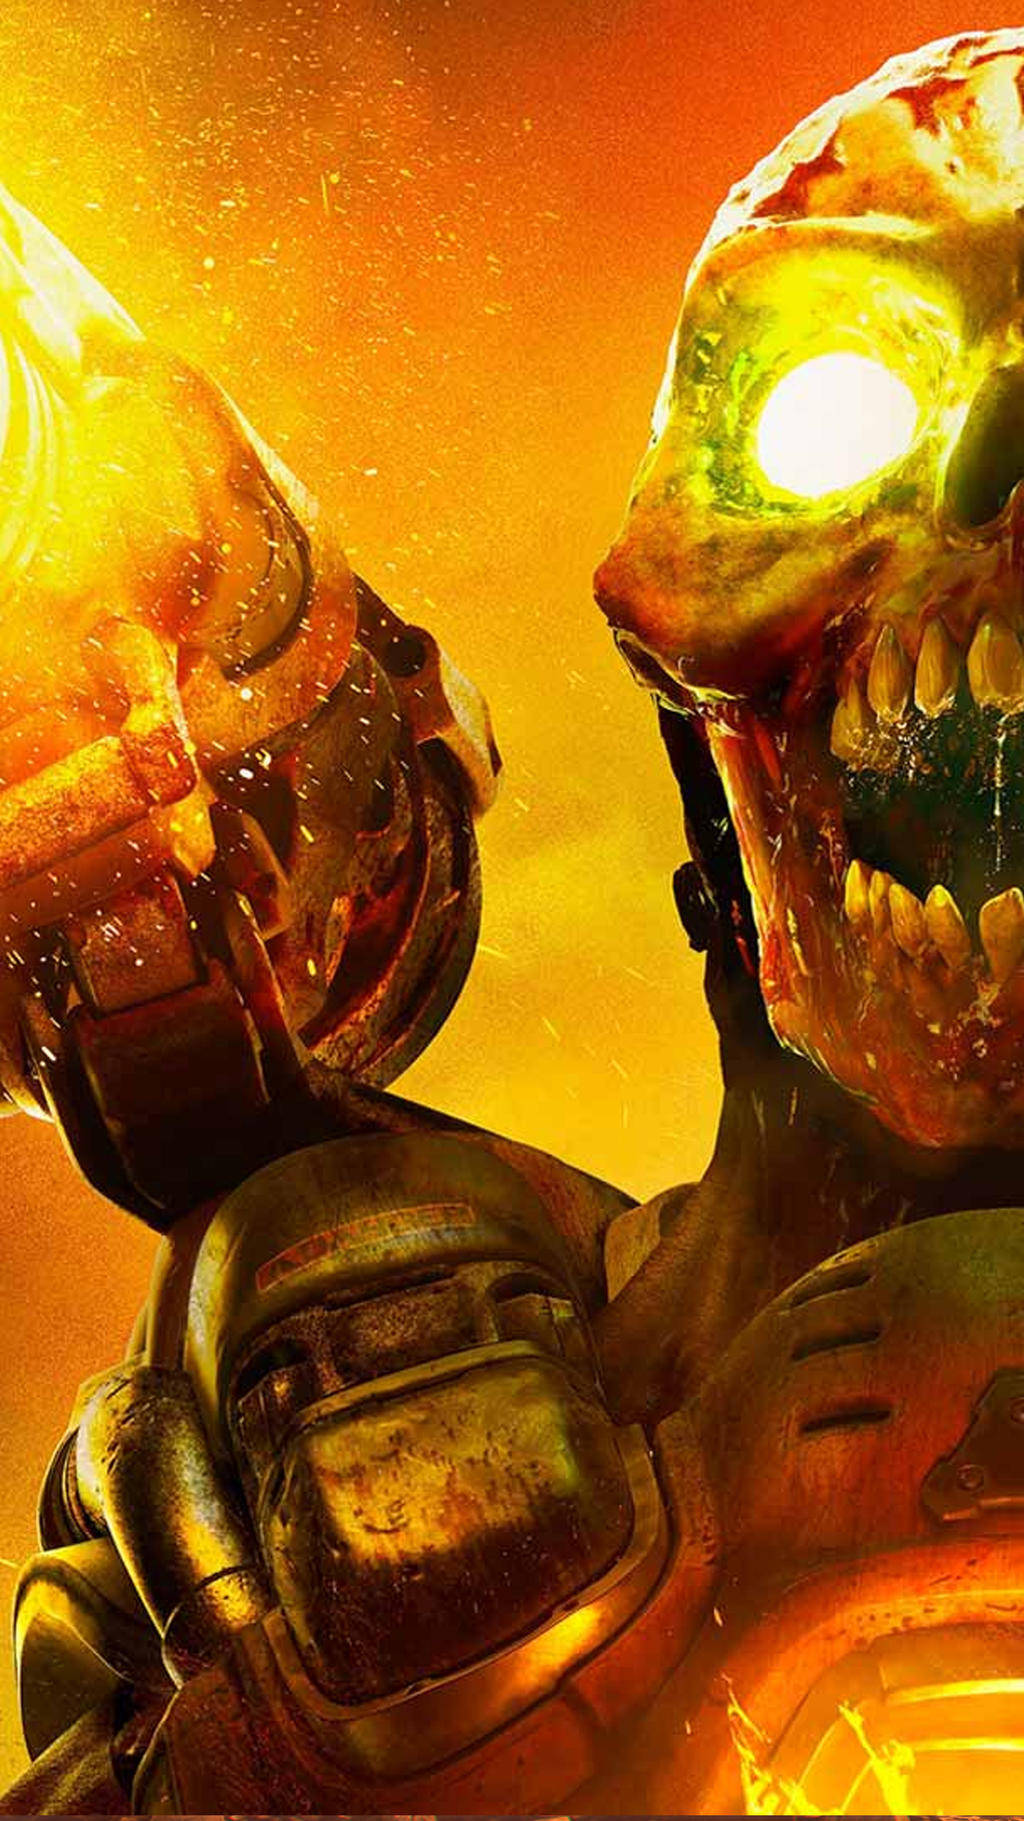 Get ready to doom with the launch of the new Doom Phone! Wallpaper